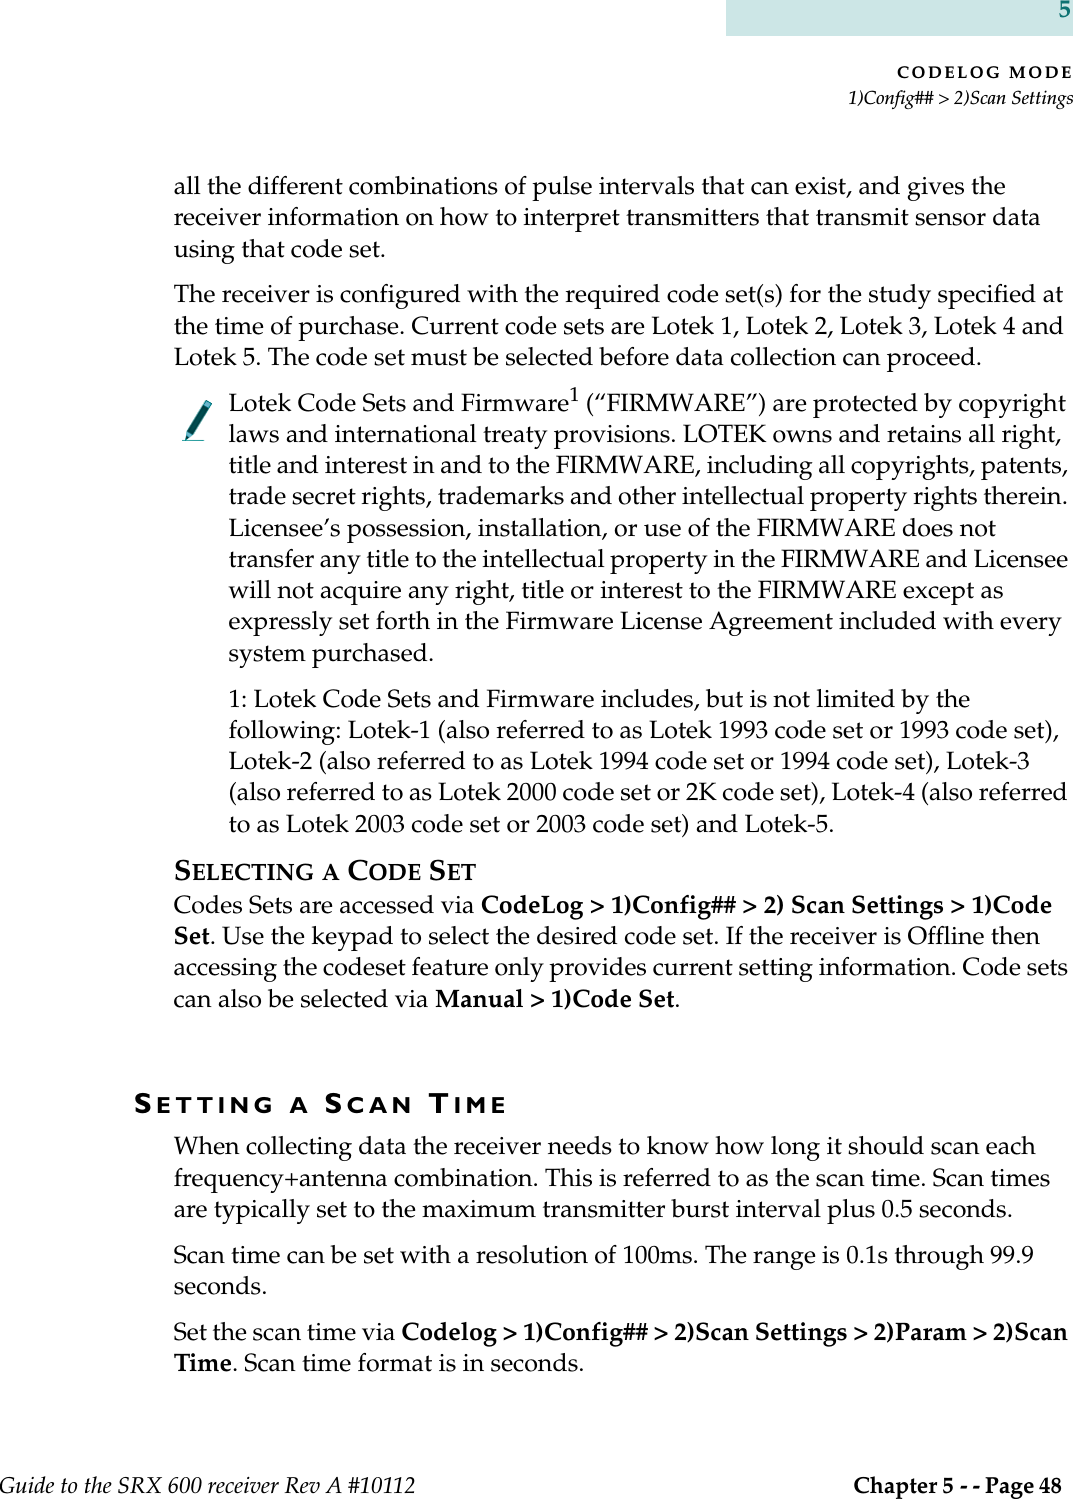 CODELOG MODE1)Config## &gt; 2)Scan SettingsGuide to the SRX 600 receiver Rev A #10112  Chapter 5 - - Page 48 5all the different combinations of pulse intervals that can exist, and gives the receiver information on how to interpret transmitters that transmit sensor data using that code set. The receiver is configured with the required code set(s) for the study specified at the time of purchase. Current code sets are Lotek 1, Lotek 2, Lotek 3, Lotek 4 and Lotek 5. The code set must be selected before data collection can proceed.Lotek Code Sets and Firmware1 (“FIRMWARE”) are protected by copyright laws and international treaty provisions. LOTEK owns and retains all right, title and interest in and to the FIRMWARE, including all copyrights, patents, trade secret rights, trademarks and other intellectual property rights therein. Licensee’s possession, installation, or use of the FIRMWARE does not transfer any title to the intellectual property in the FIRMWARE and Licensee will not acquire any right, title or interest to the FIRMWARE except as expressly set forth in the Firmware License Agreement included with every system purchased.1: Lotek Code Sets and Firmware includes, but is not limited by the following: Lotek-1 (also referred to as Lotek 1993 code set or 1993 code set), Lotek-2 (also referred to as Lotek 1994 code set or 1994 code set), Lotek-3 (also referred to as Lotek 2000 code set or 2K code set), Lotek-4 (also referred to as Lotek 2003 code set or 2003 code set) and Lotek-5.SELECTING A CODE SETCodes Sets are accessed via CodeLog &gt; 1)Config## &gt; 2) Scan Settings &gt; 1)Code Set. Use the keypad to select the desired code set. If the receiver is Offline then accessing the codeset feature only provides current setting information. Code sets can also be selected via Manual &gt; 1)Code Set.SETTING A SCAN TIMEWhen collecting data the receiver needs to know how long it should scan each frequency+antenna combination. This is referred to as the scan time. Scan times are typically set to the maximum transmitter burst interval plus 0.5 seconds.Scan time can be set with a resolution of 100ms. The range is 0.1s through 99.9 seconds.Set the scan time via Codelog &gt; 1)Config## &gt; 2)Scan Settings &gt; 2)Param &gt; 2)Scan Time. Scan time format is in seconds.